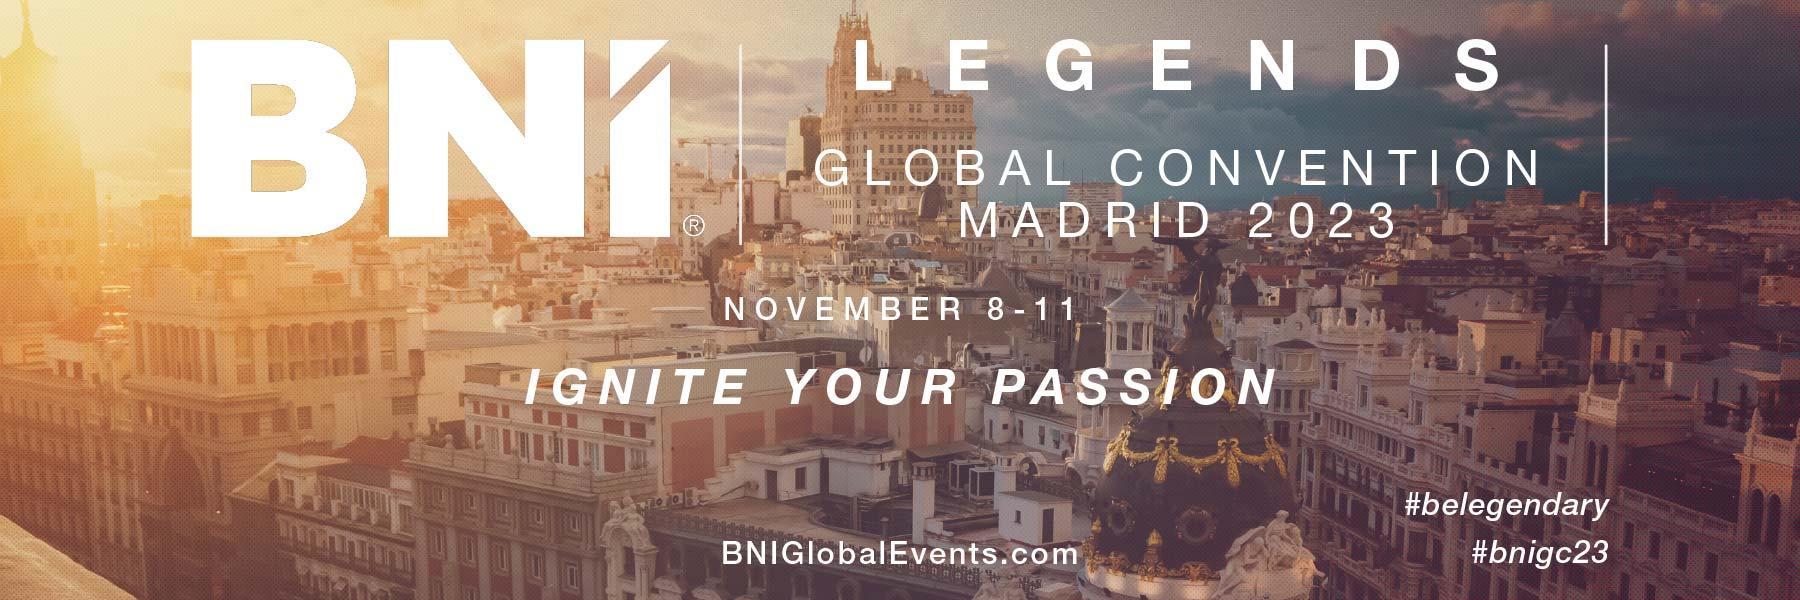 BNI Global Convention 2023 in Madrid